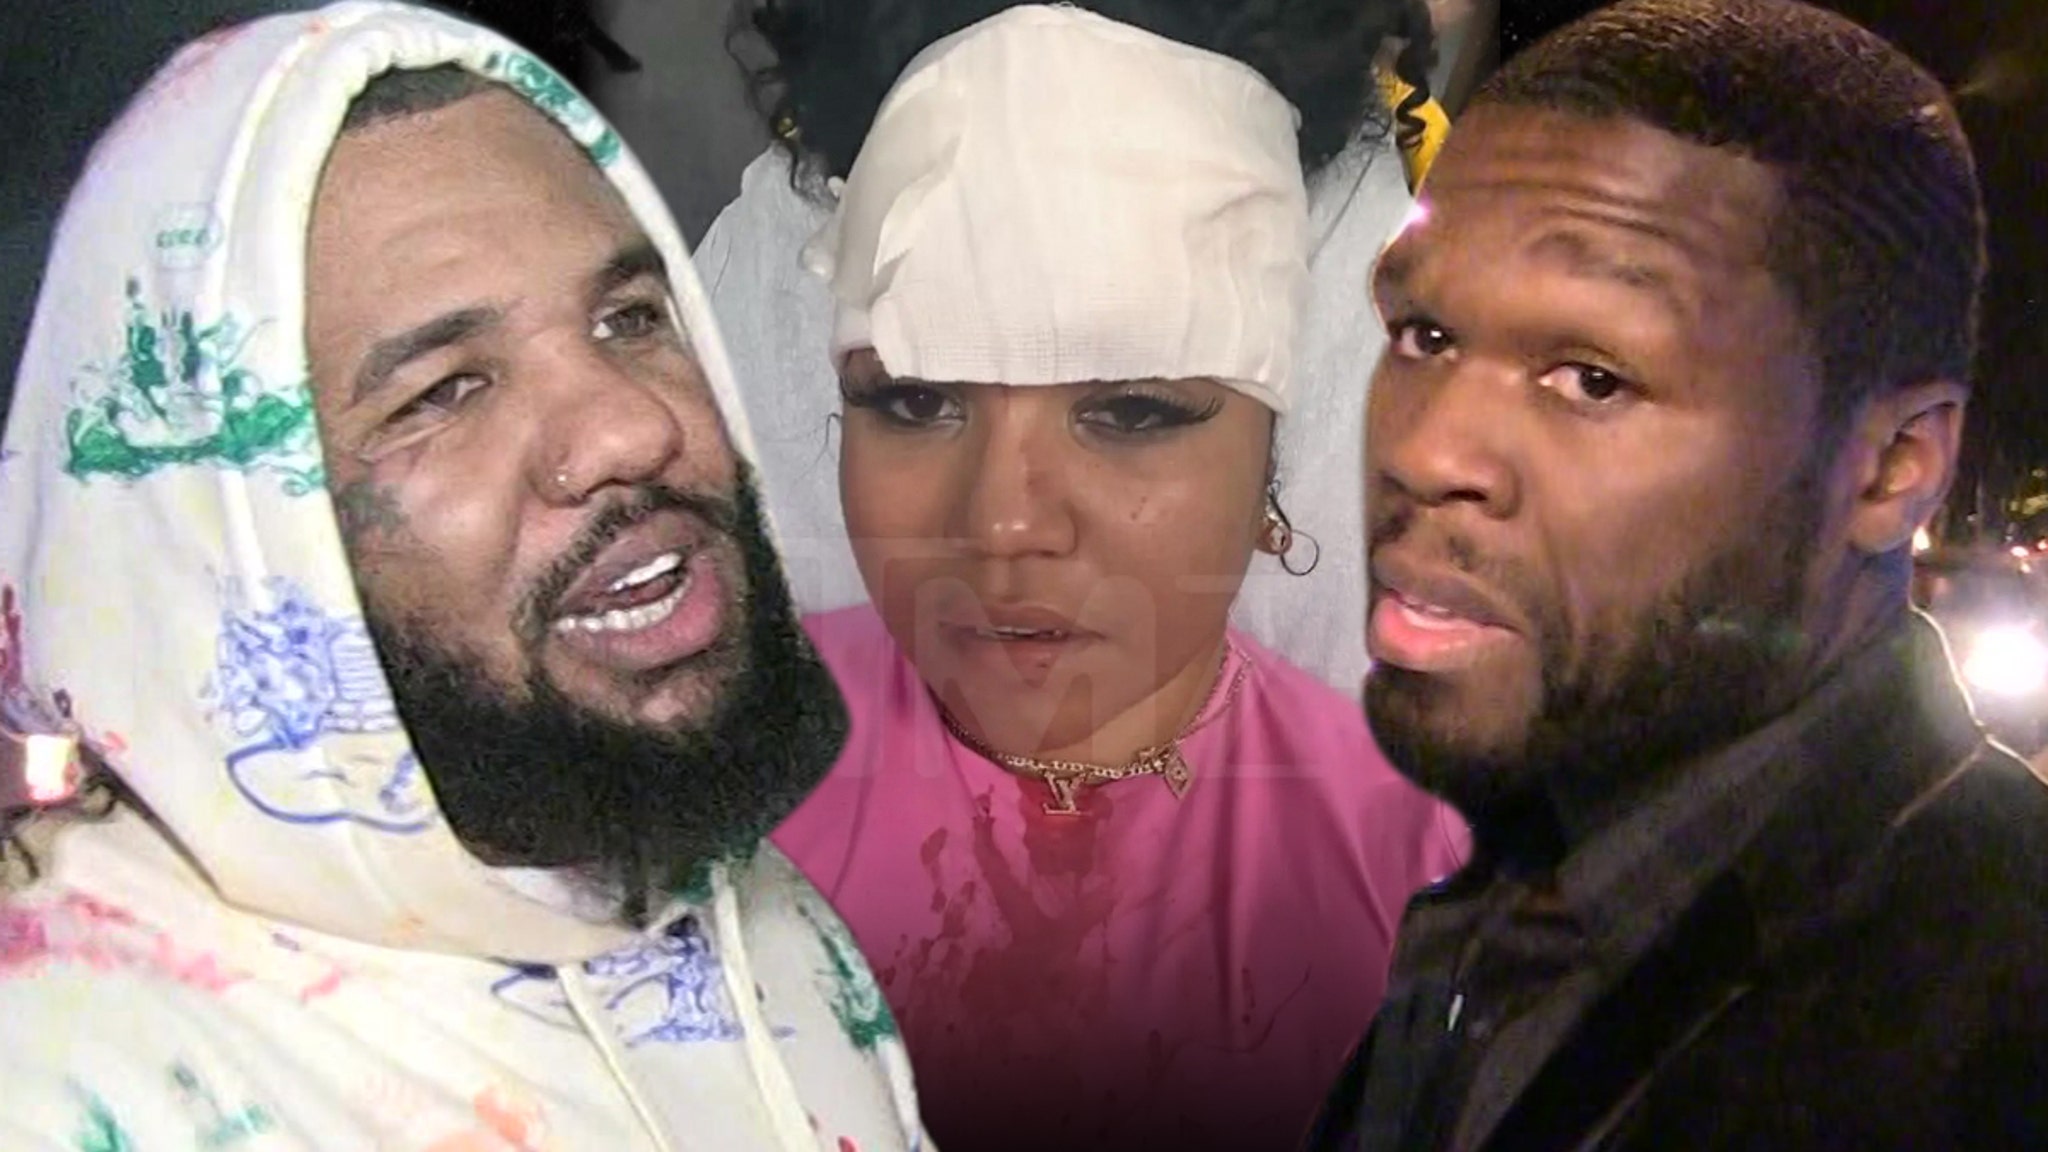 The Game Rips 50 Cent for Throwing Mic That Bloodied Power 106 Host